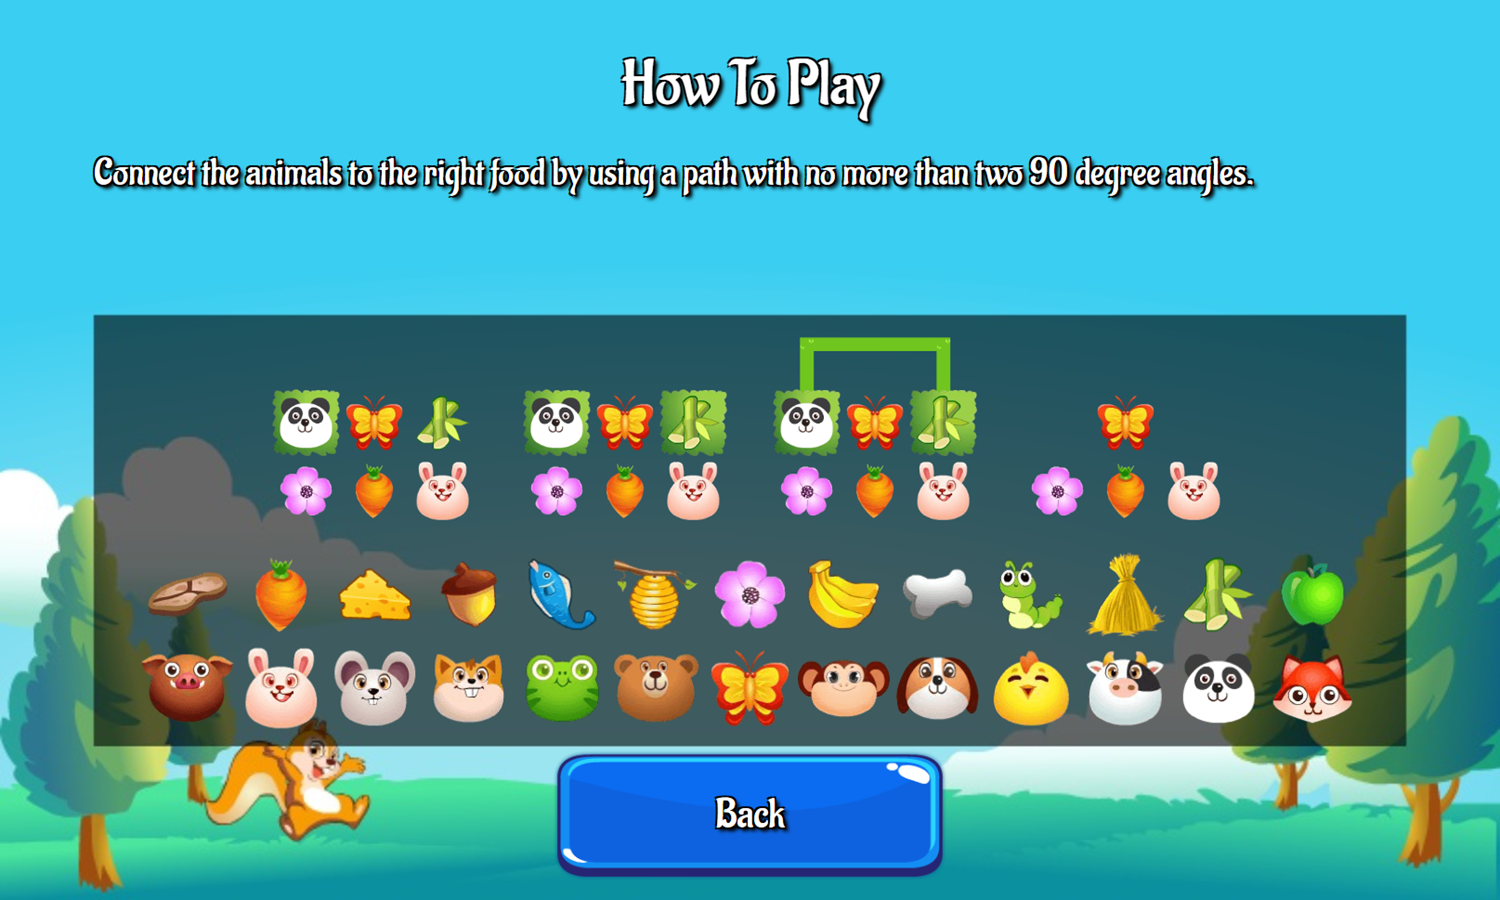 Feed the Animals Game How To Play Screenshot.